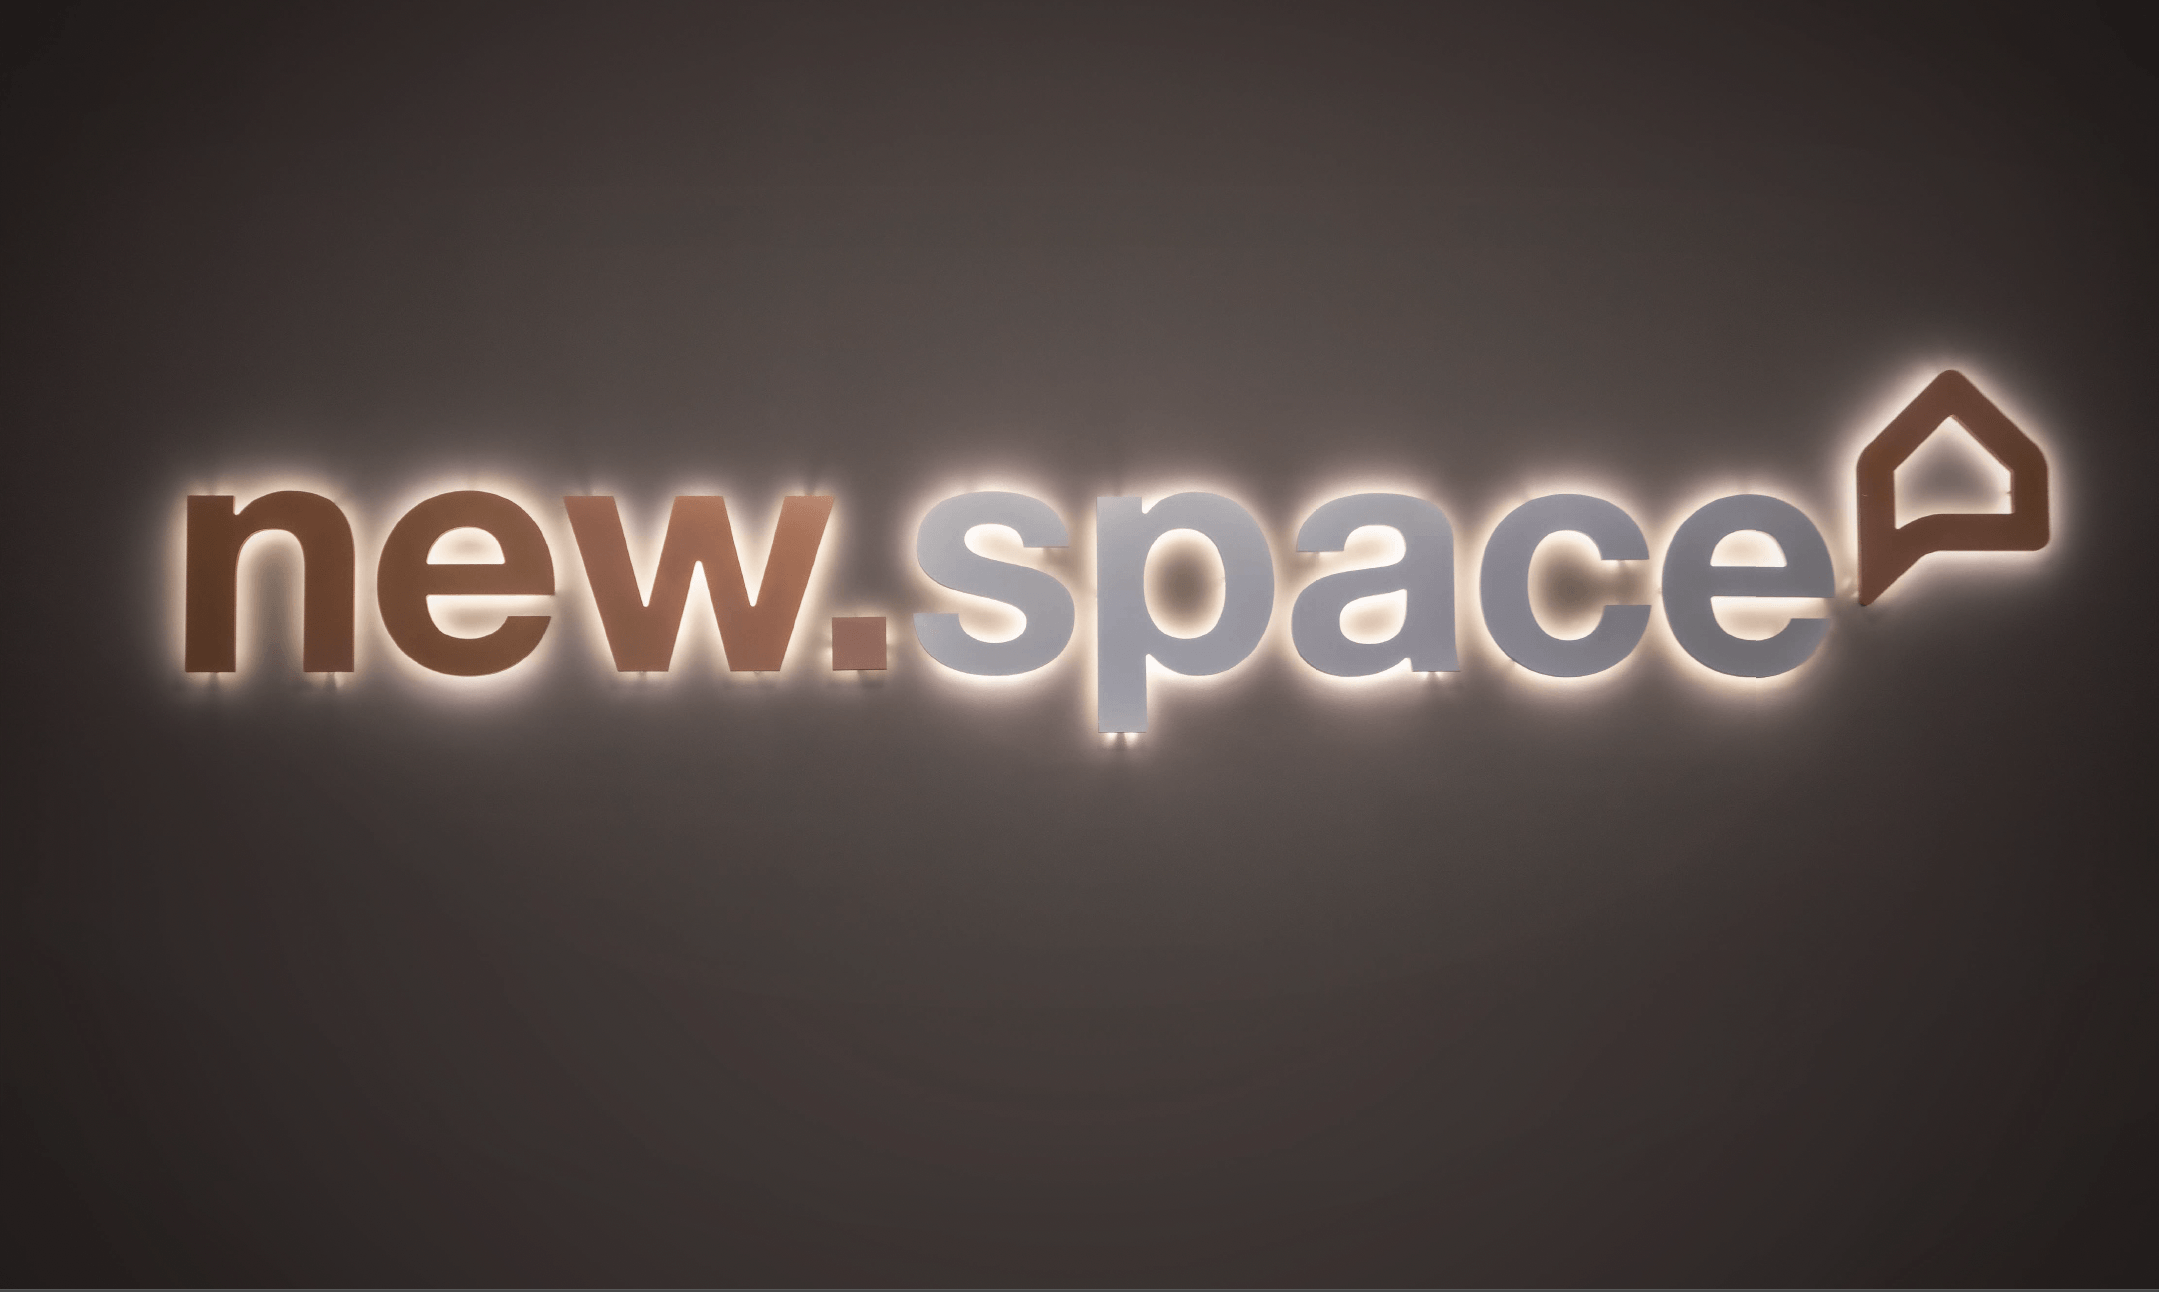 About new.space